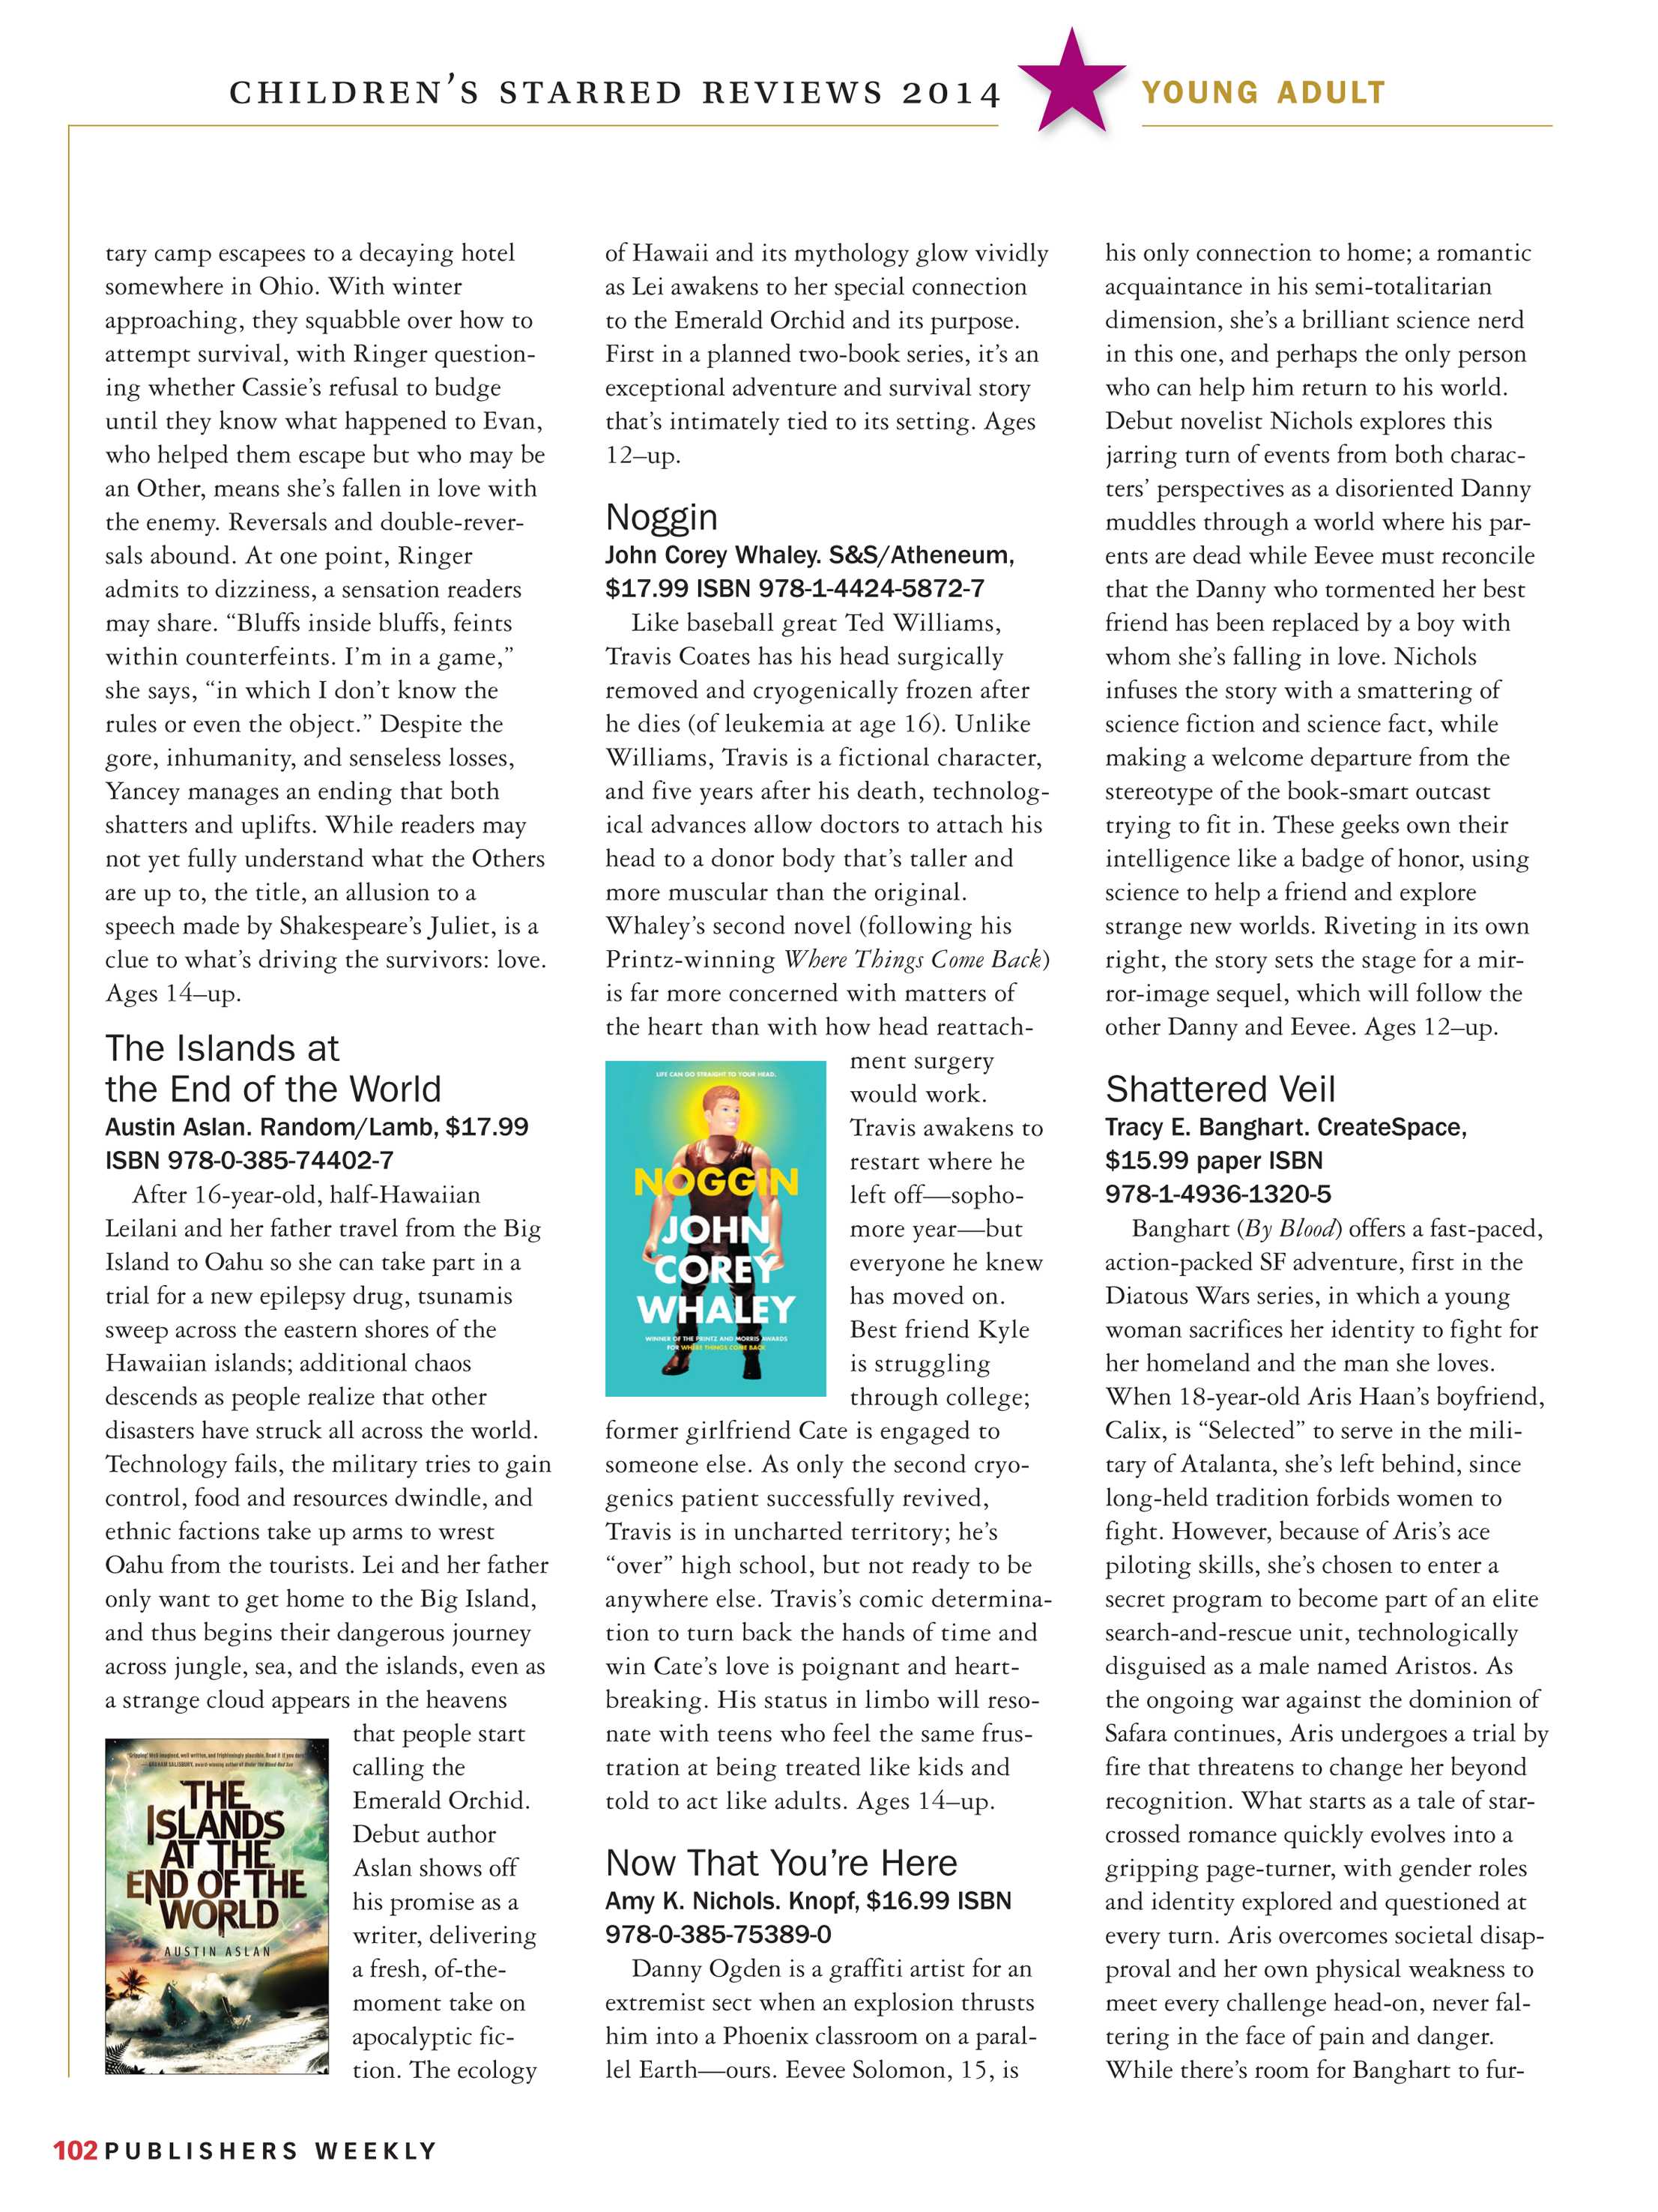 Publishers Weekly - 2014 Starred Reviews Childrens pic